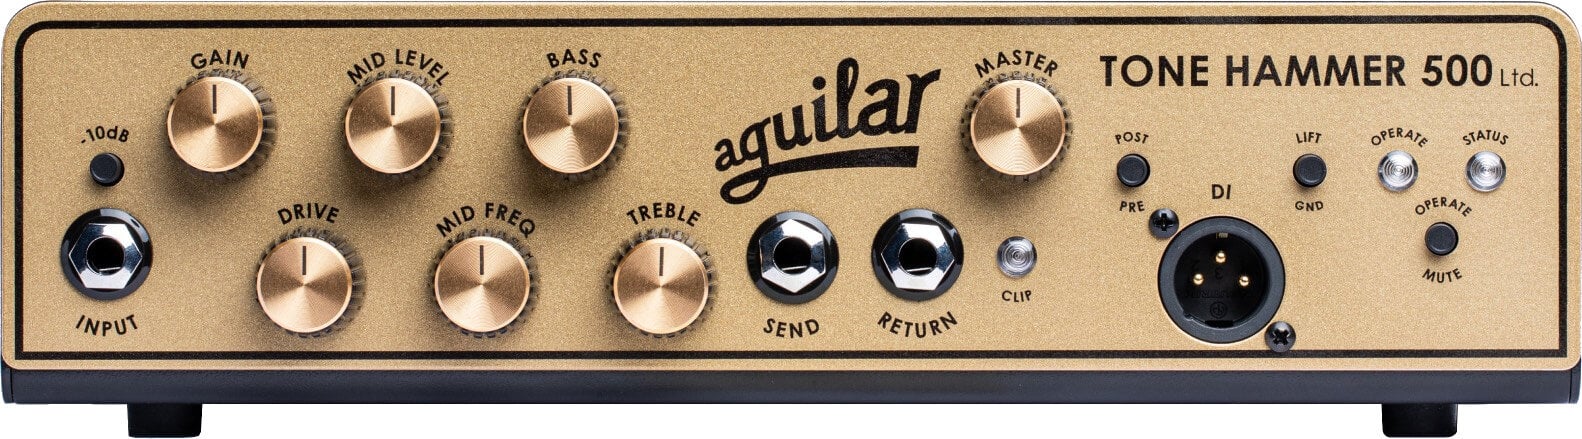 Solid-State Bass Amplifier Aguilar Tone Hammer 500 Gold